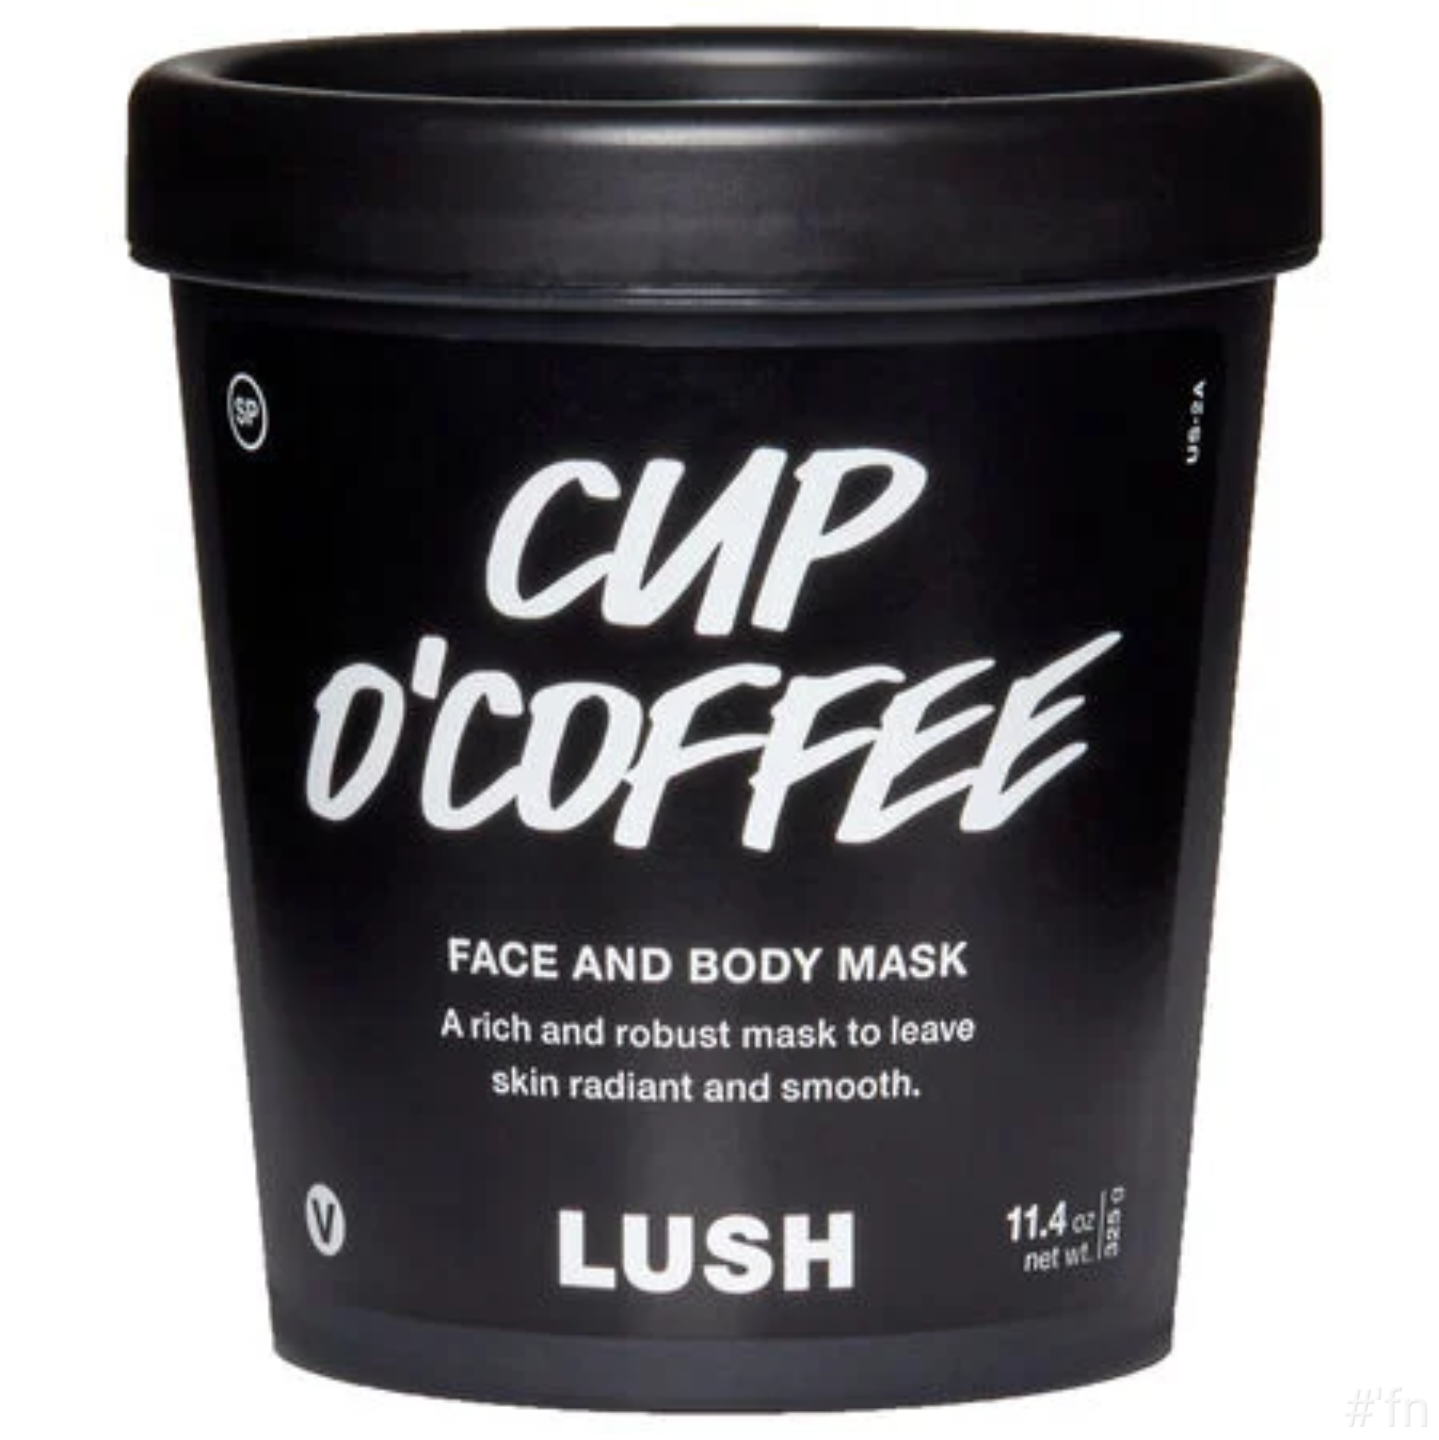 cup o' coffee face and body mask by lush